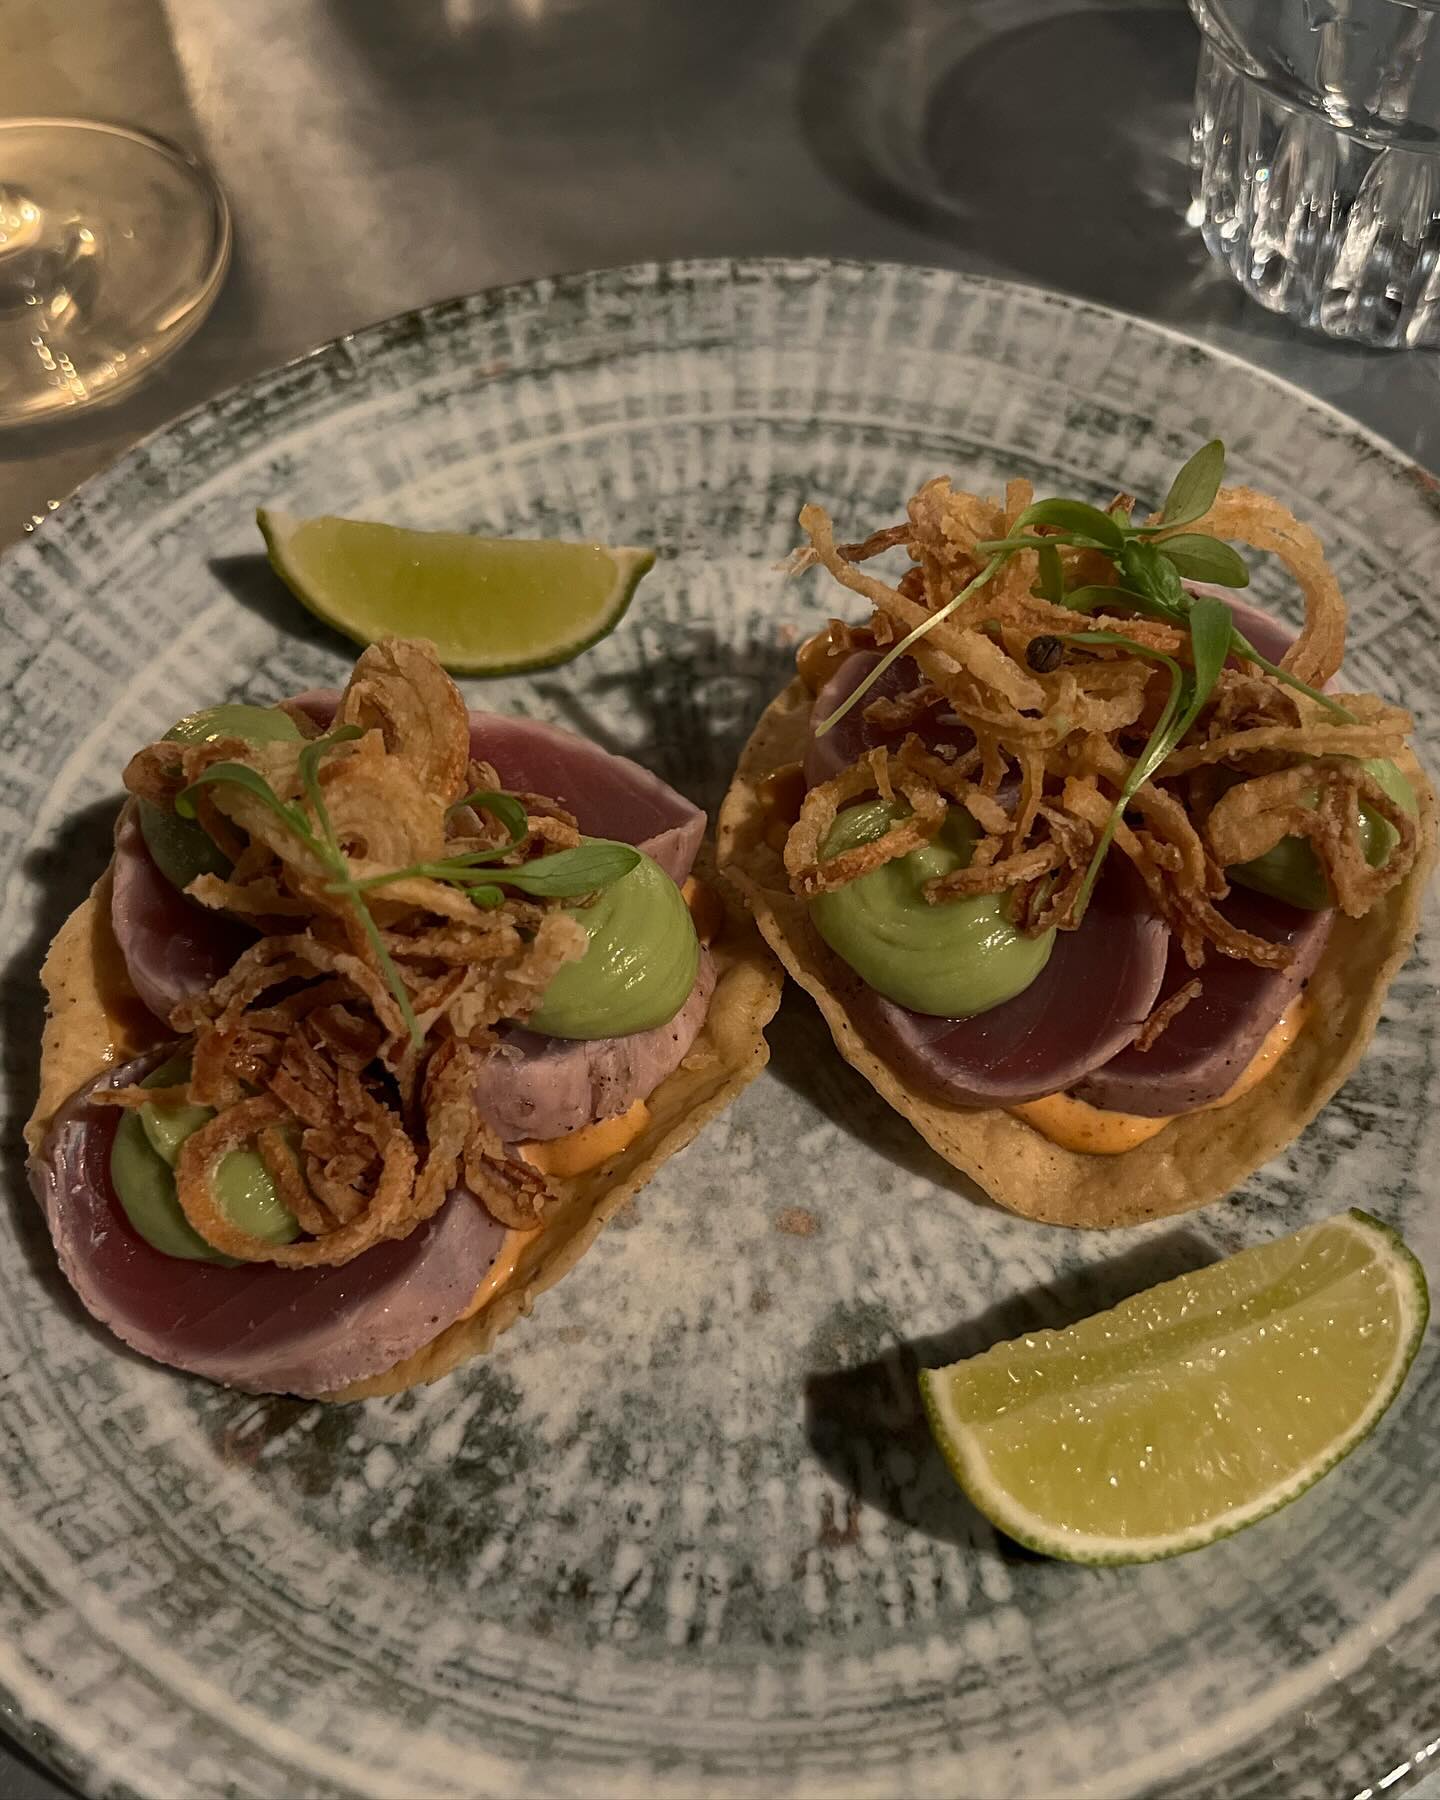 Tasty birthday nyoms from @elevendublin on the N11/bray road… yellowfin tuna / fillet steak/ monkfish . Another great spot out in the burbs!